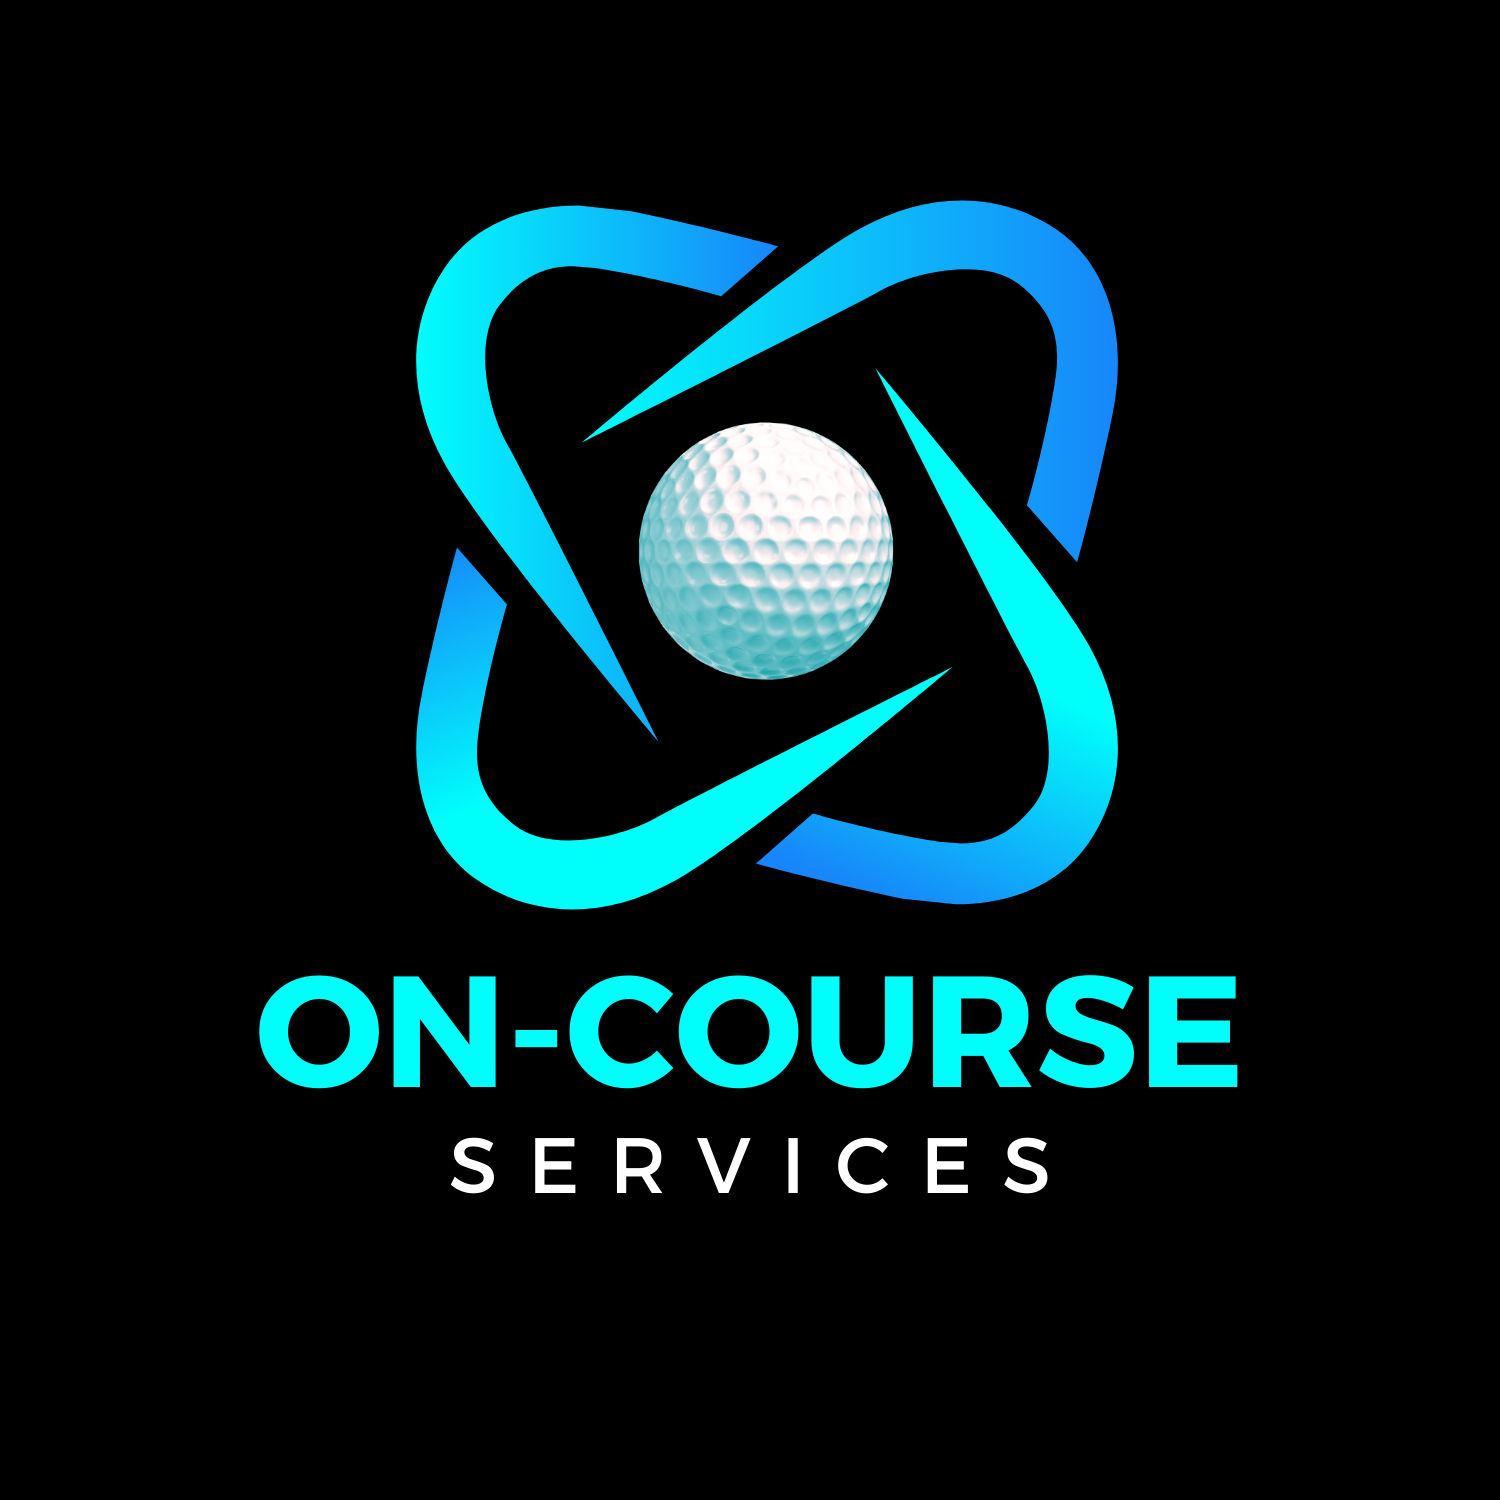 On-Course Services